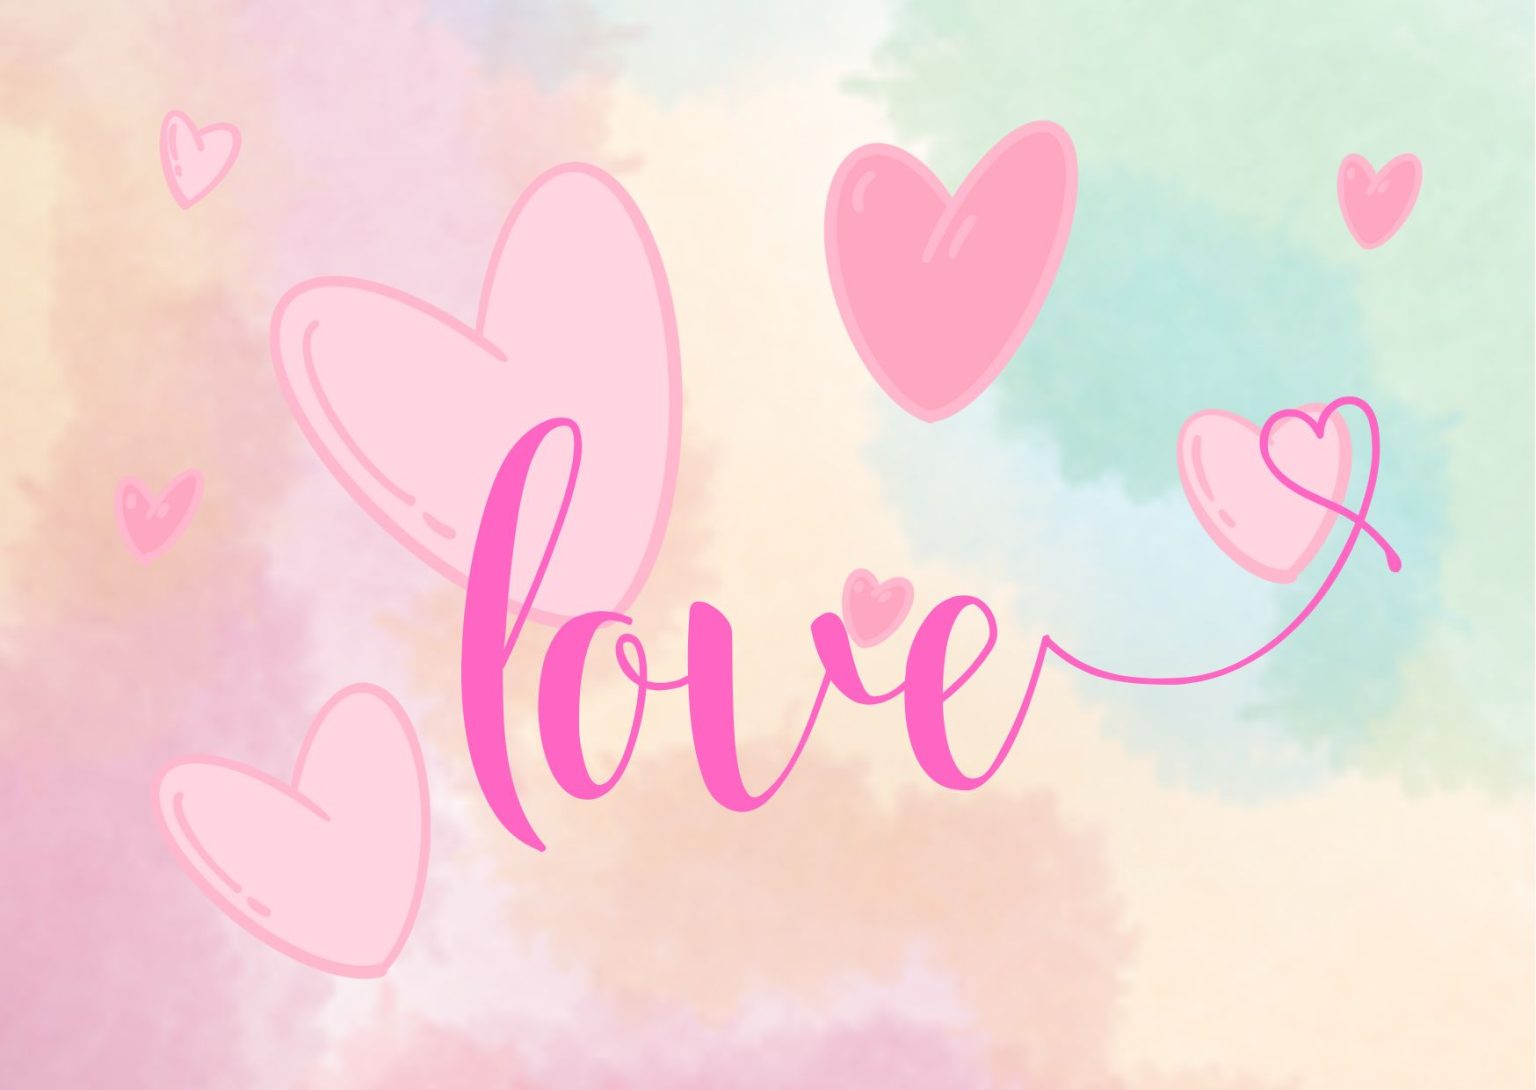 Love: What Is It? Meaning, Background, Symptoms, and Types